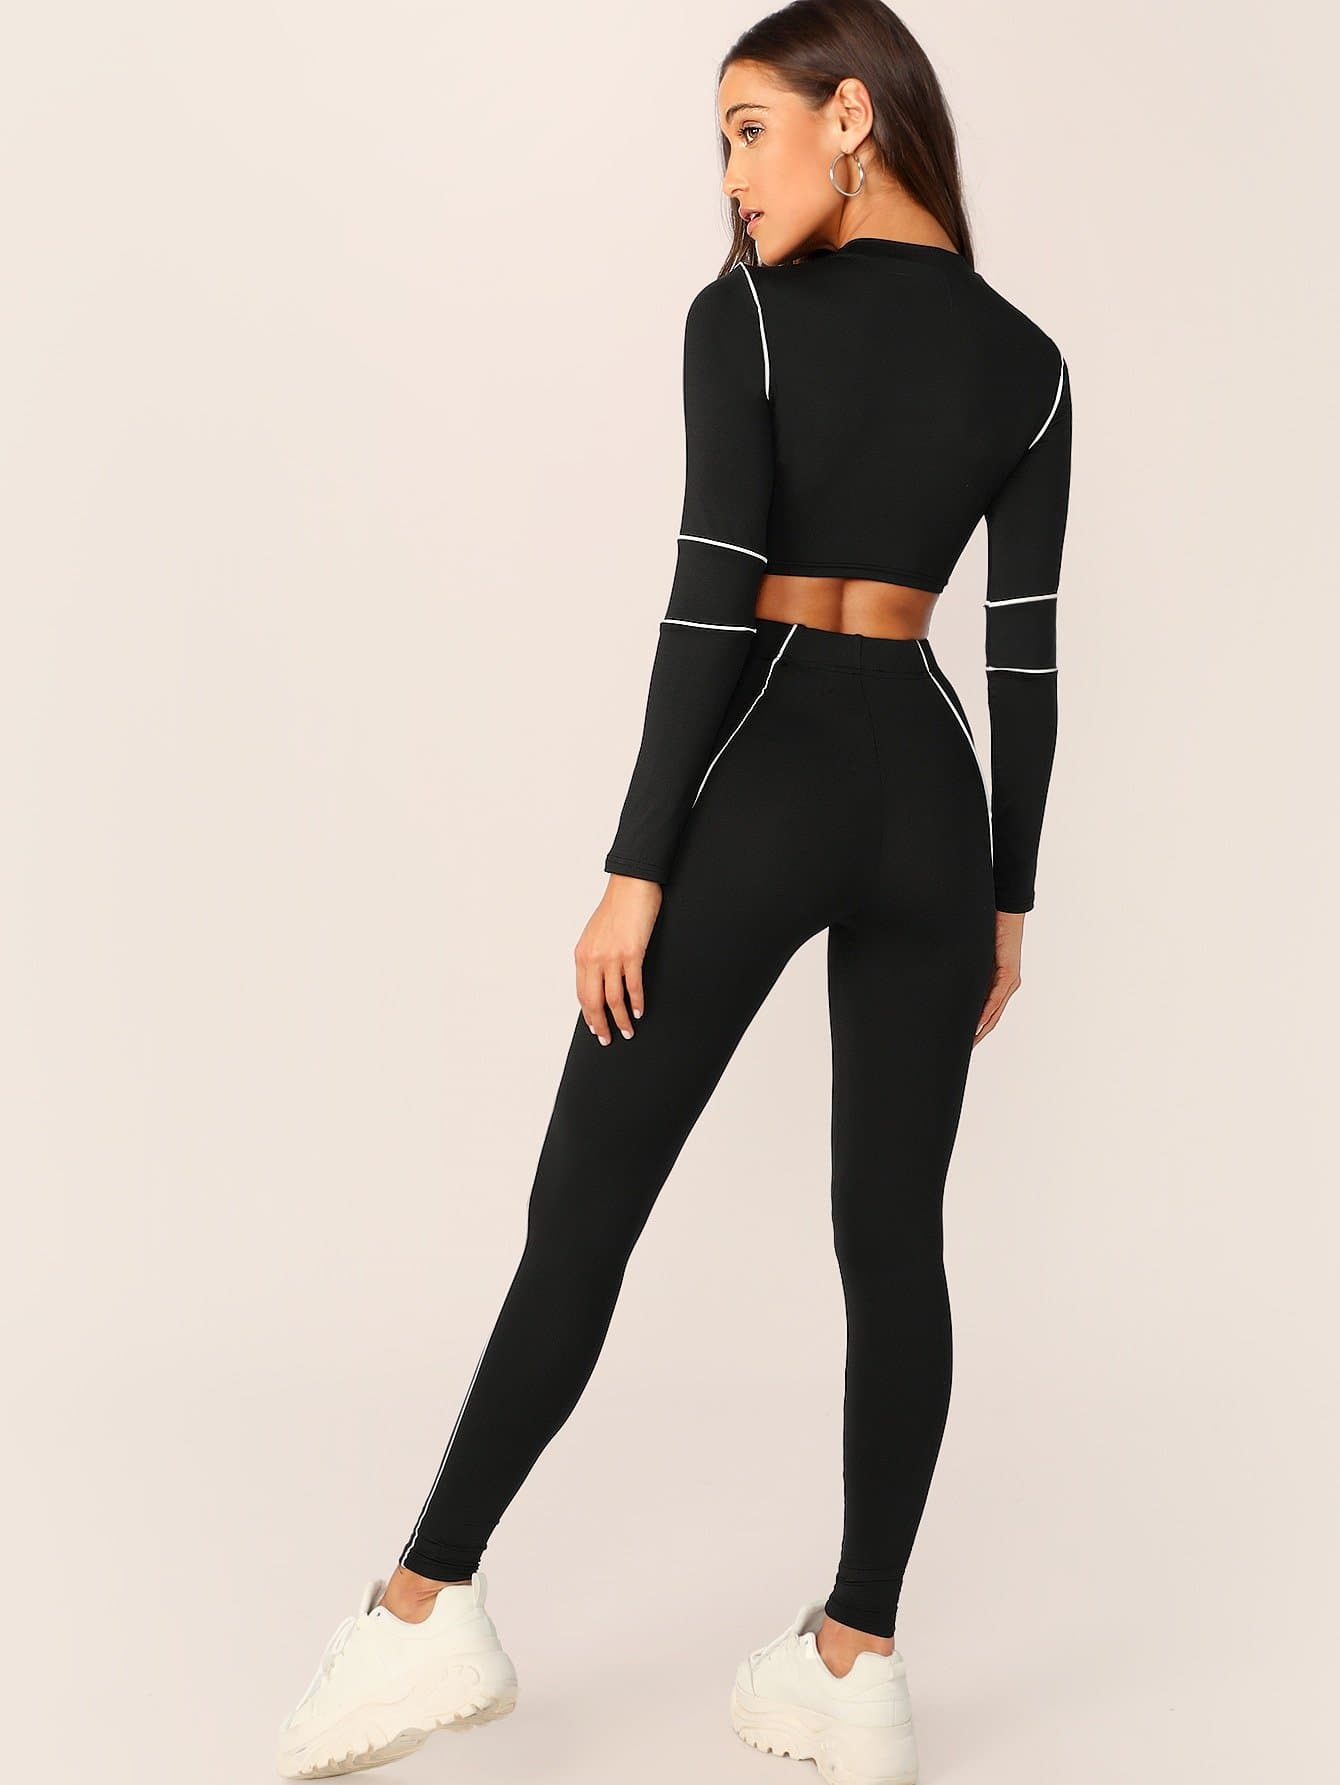 Black and White Contrast Trim Stretch Crop Top And Leggings Set